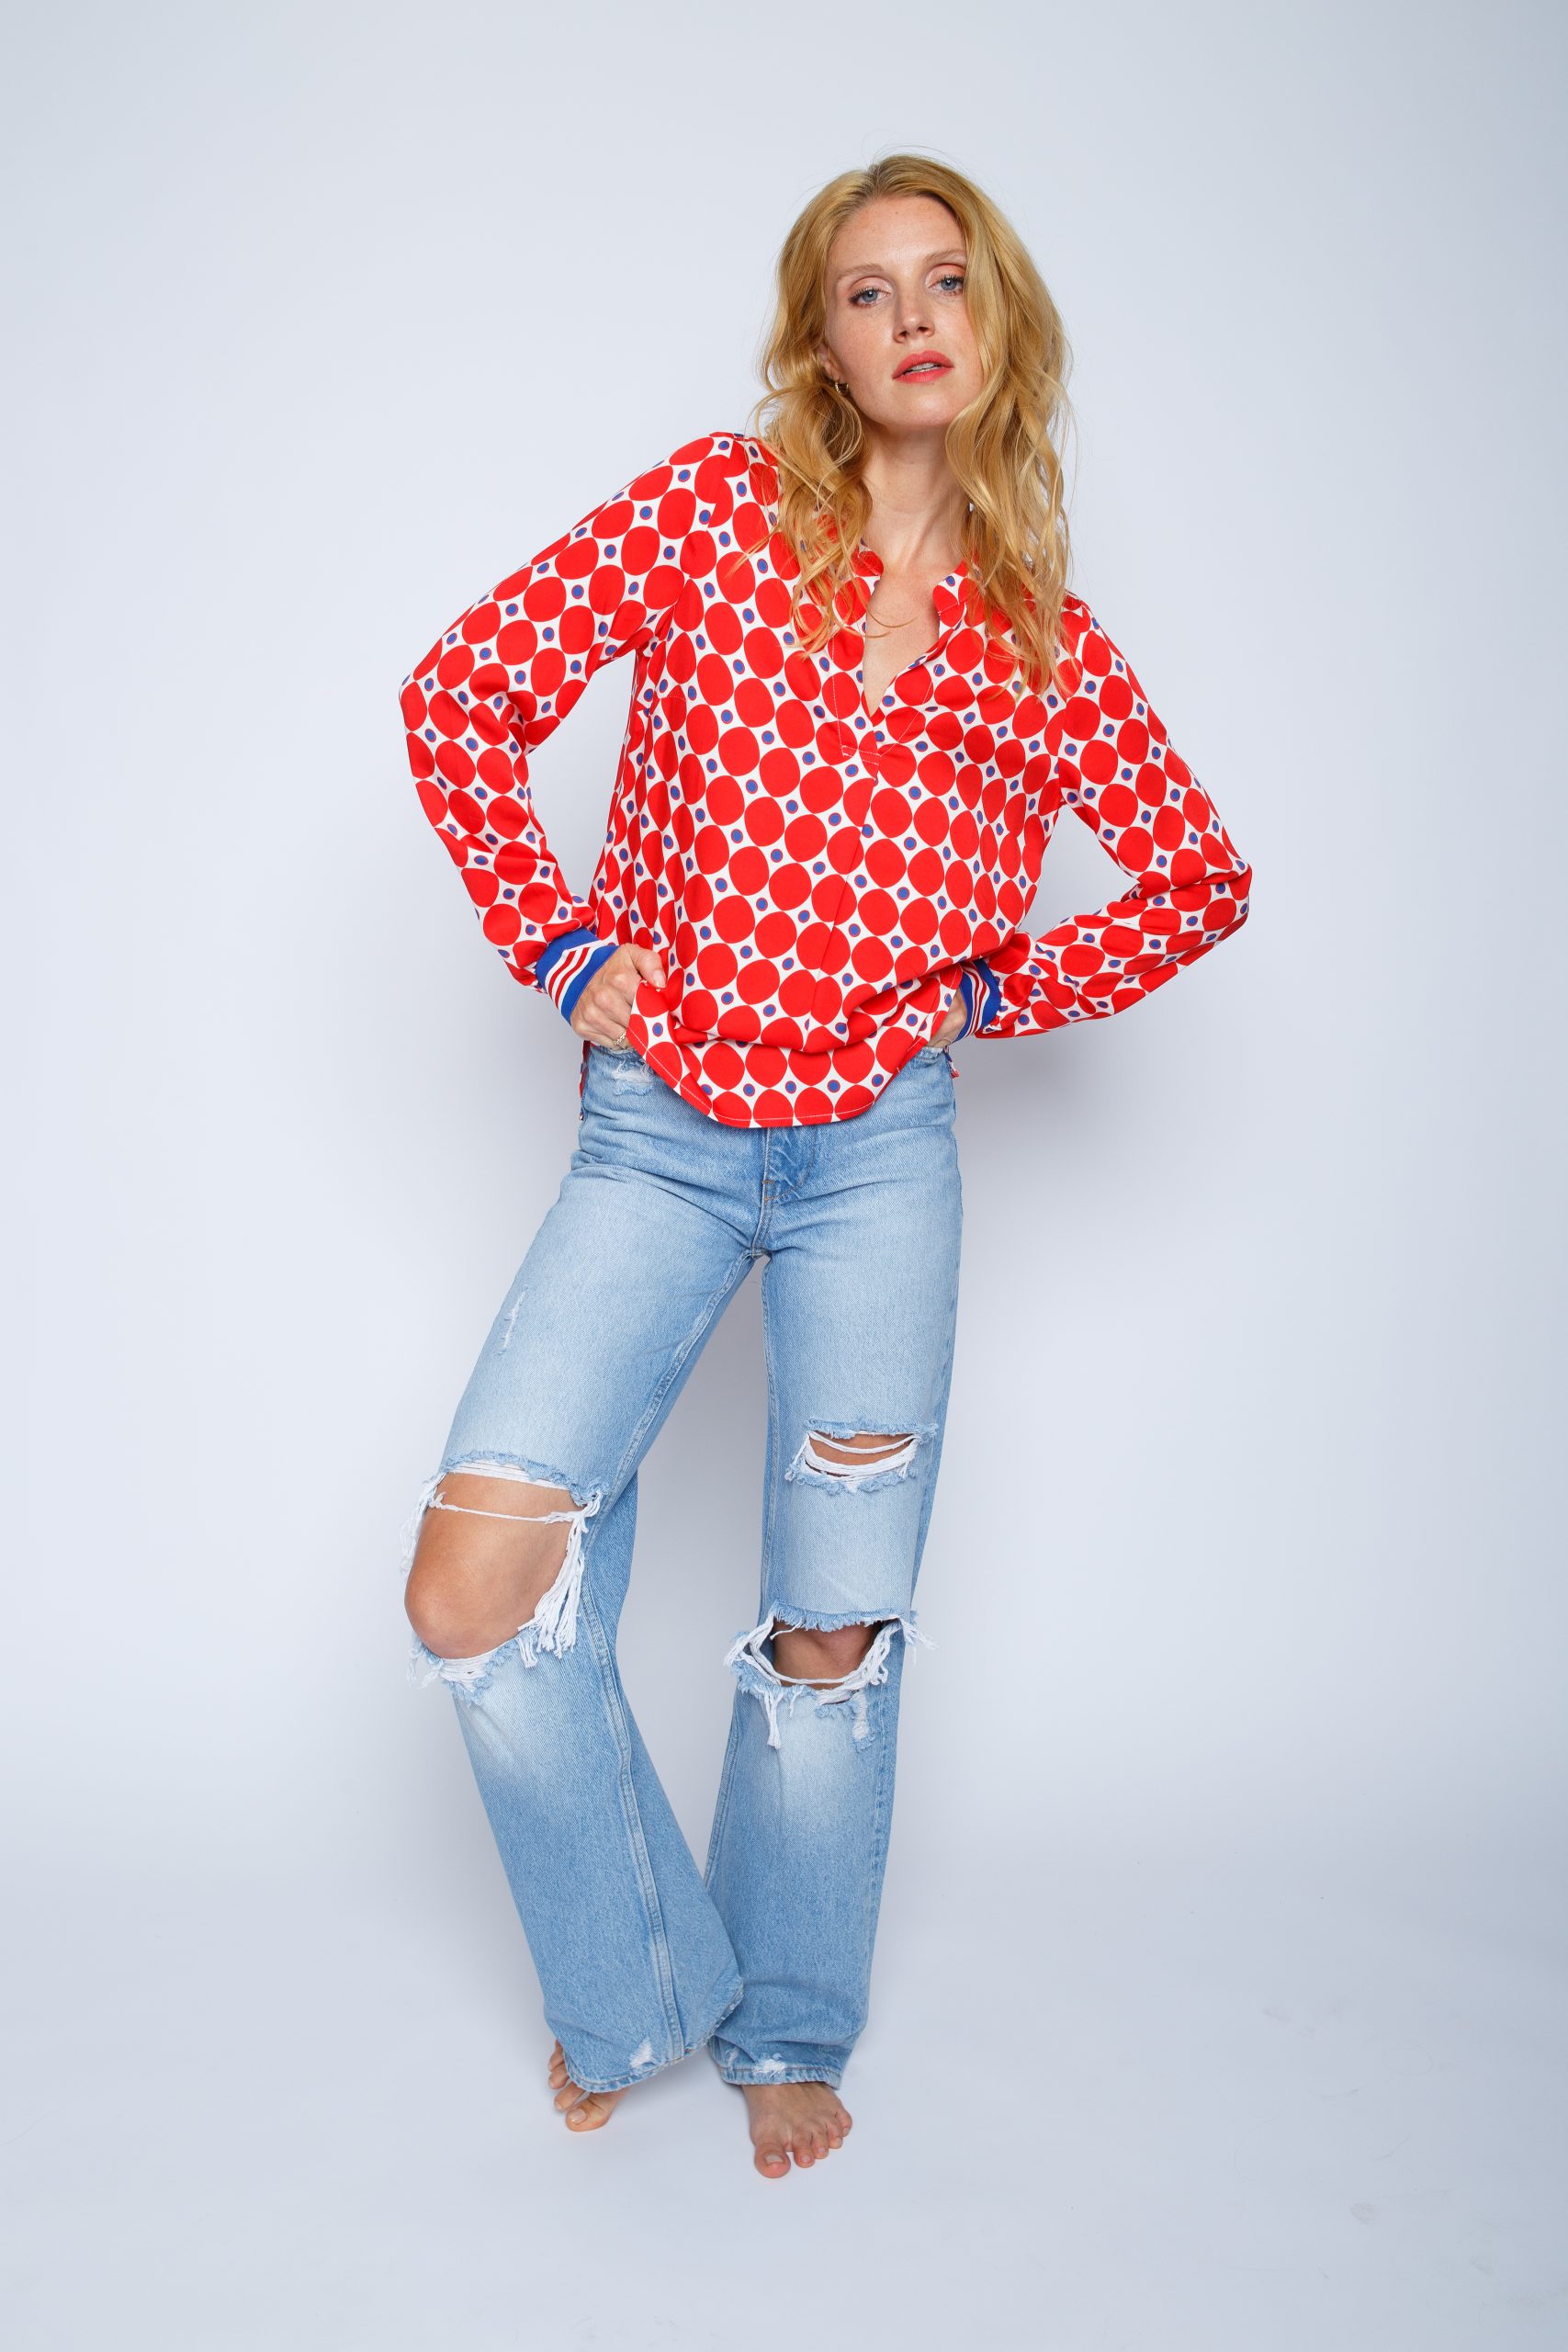 EMILY VAN DEN BERGH Bluse Red Dots 8118-154720 Red 42